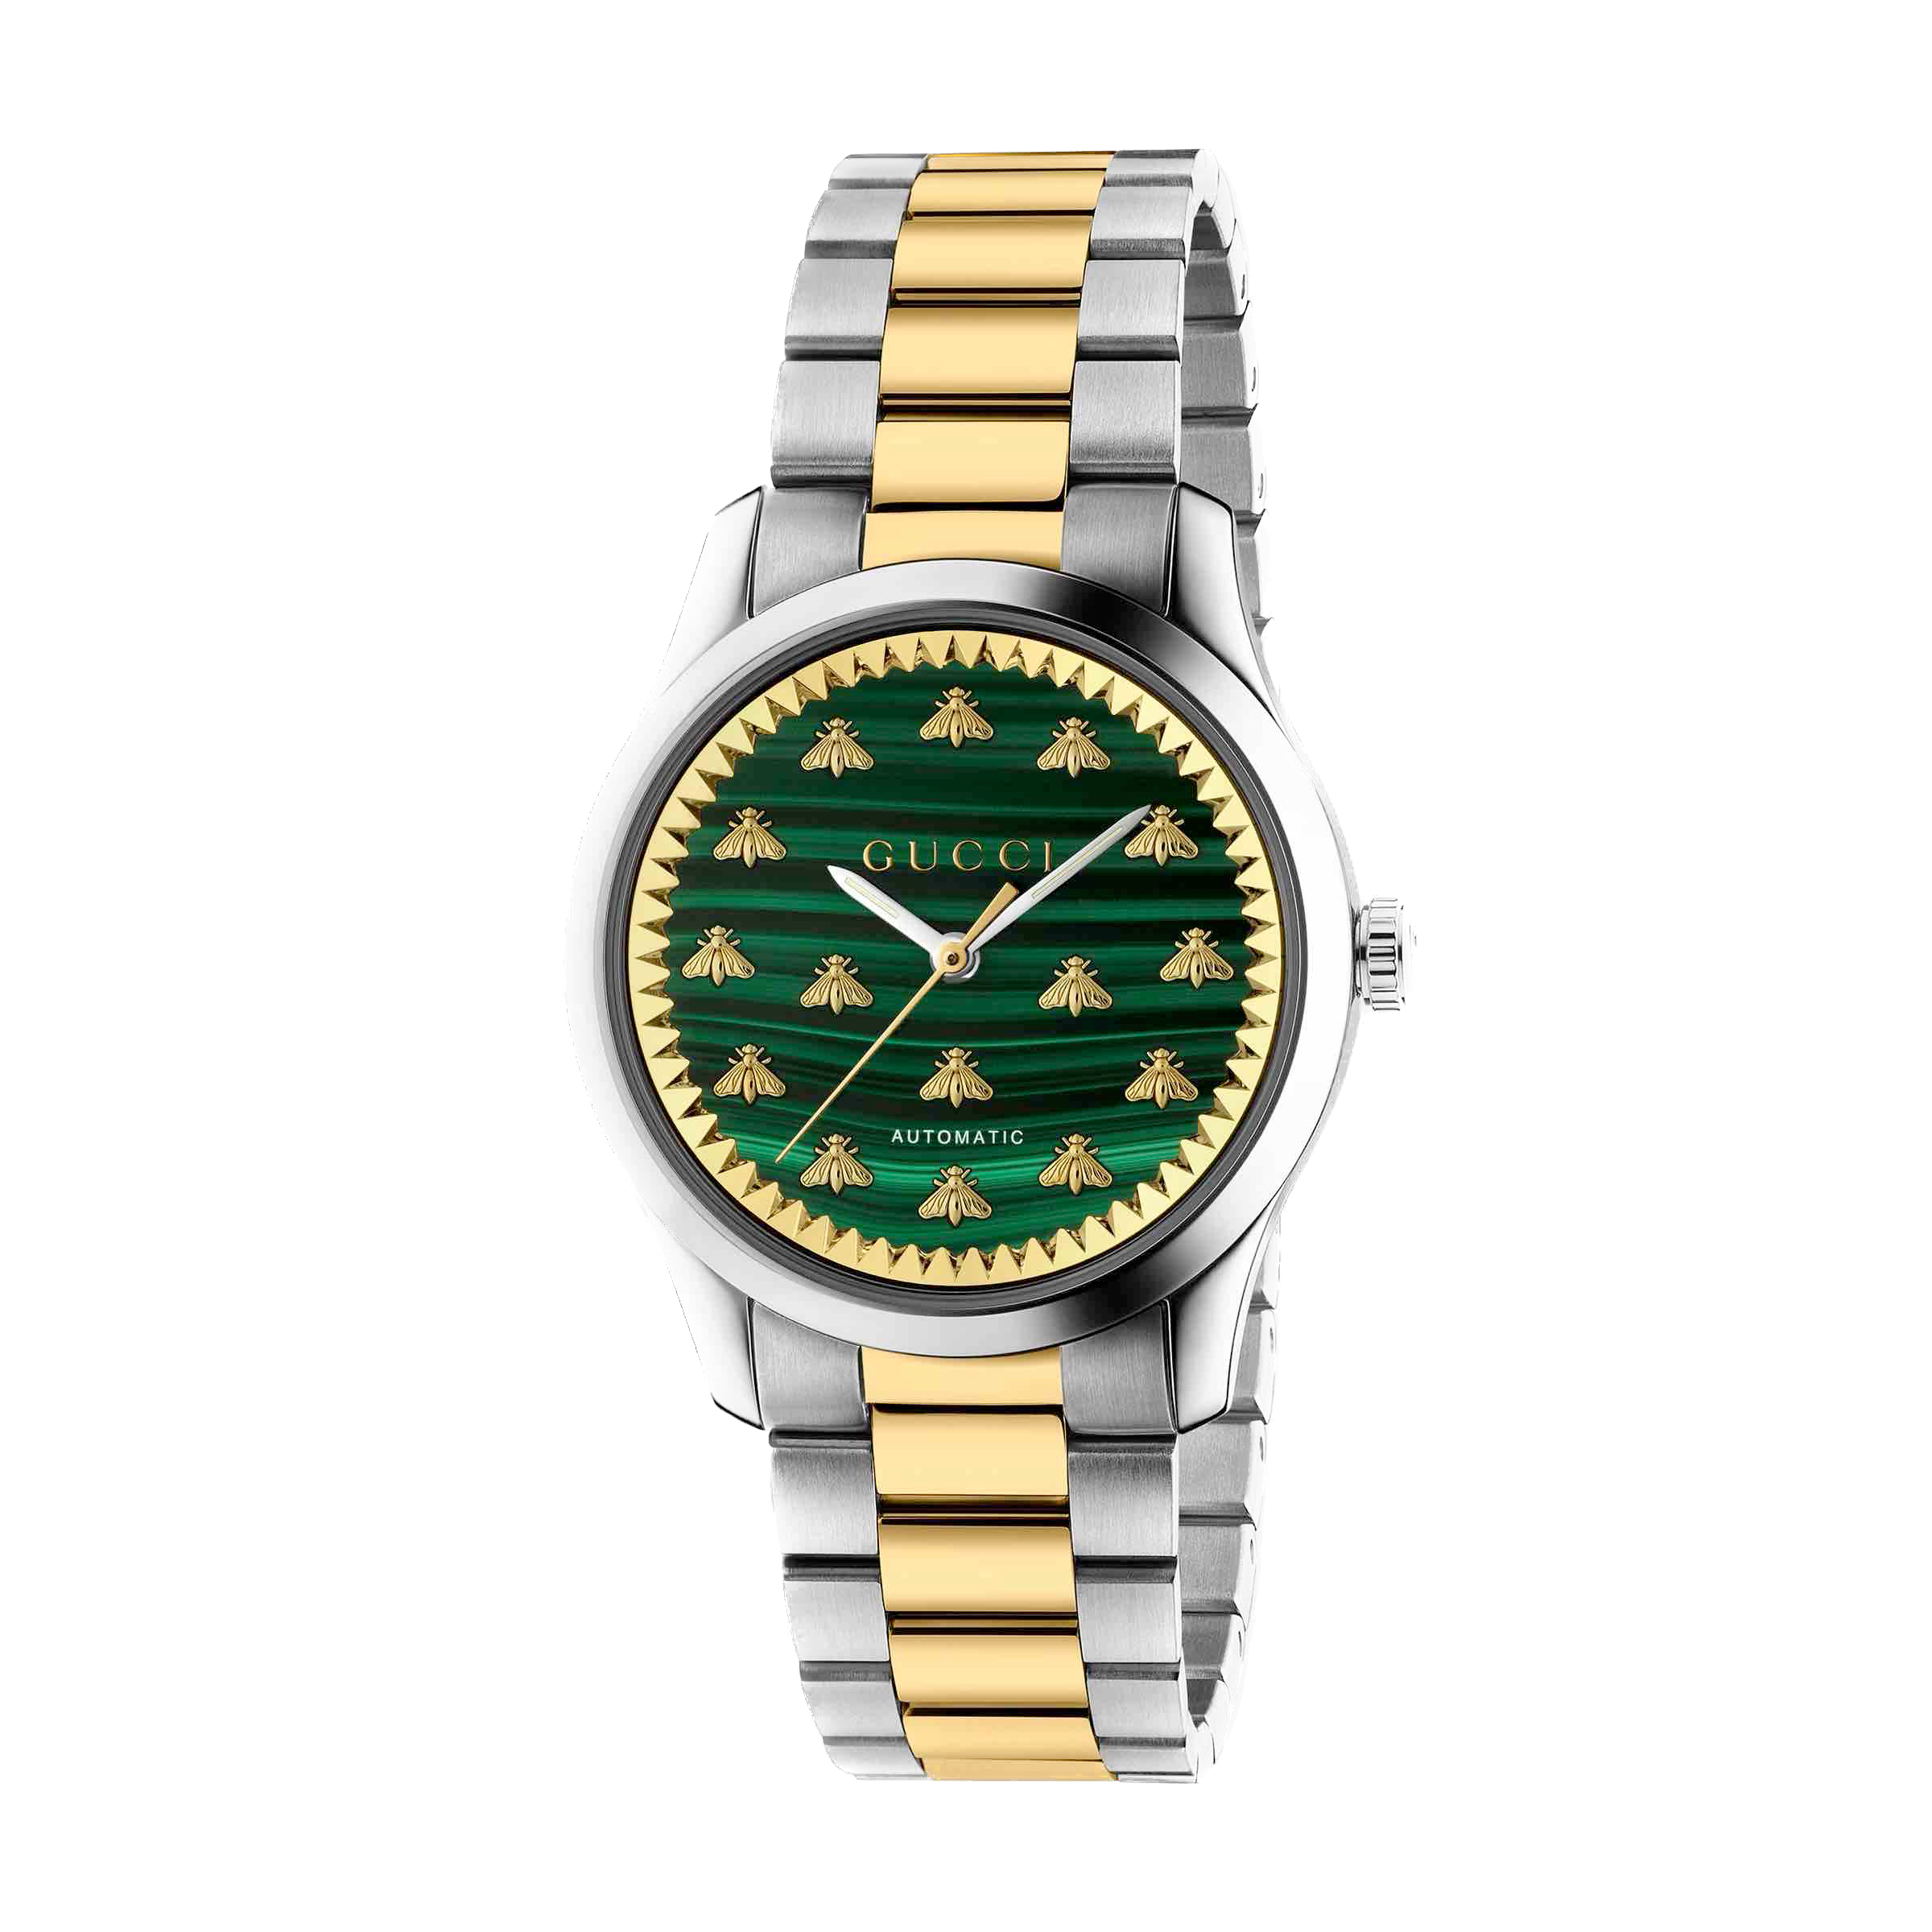 GUCCI G-Timeless watch with bees